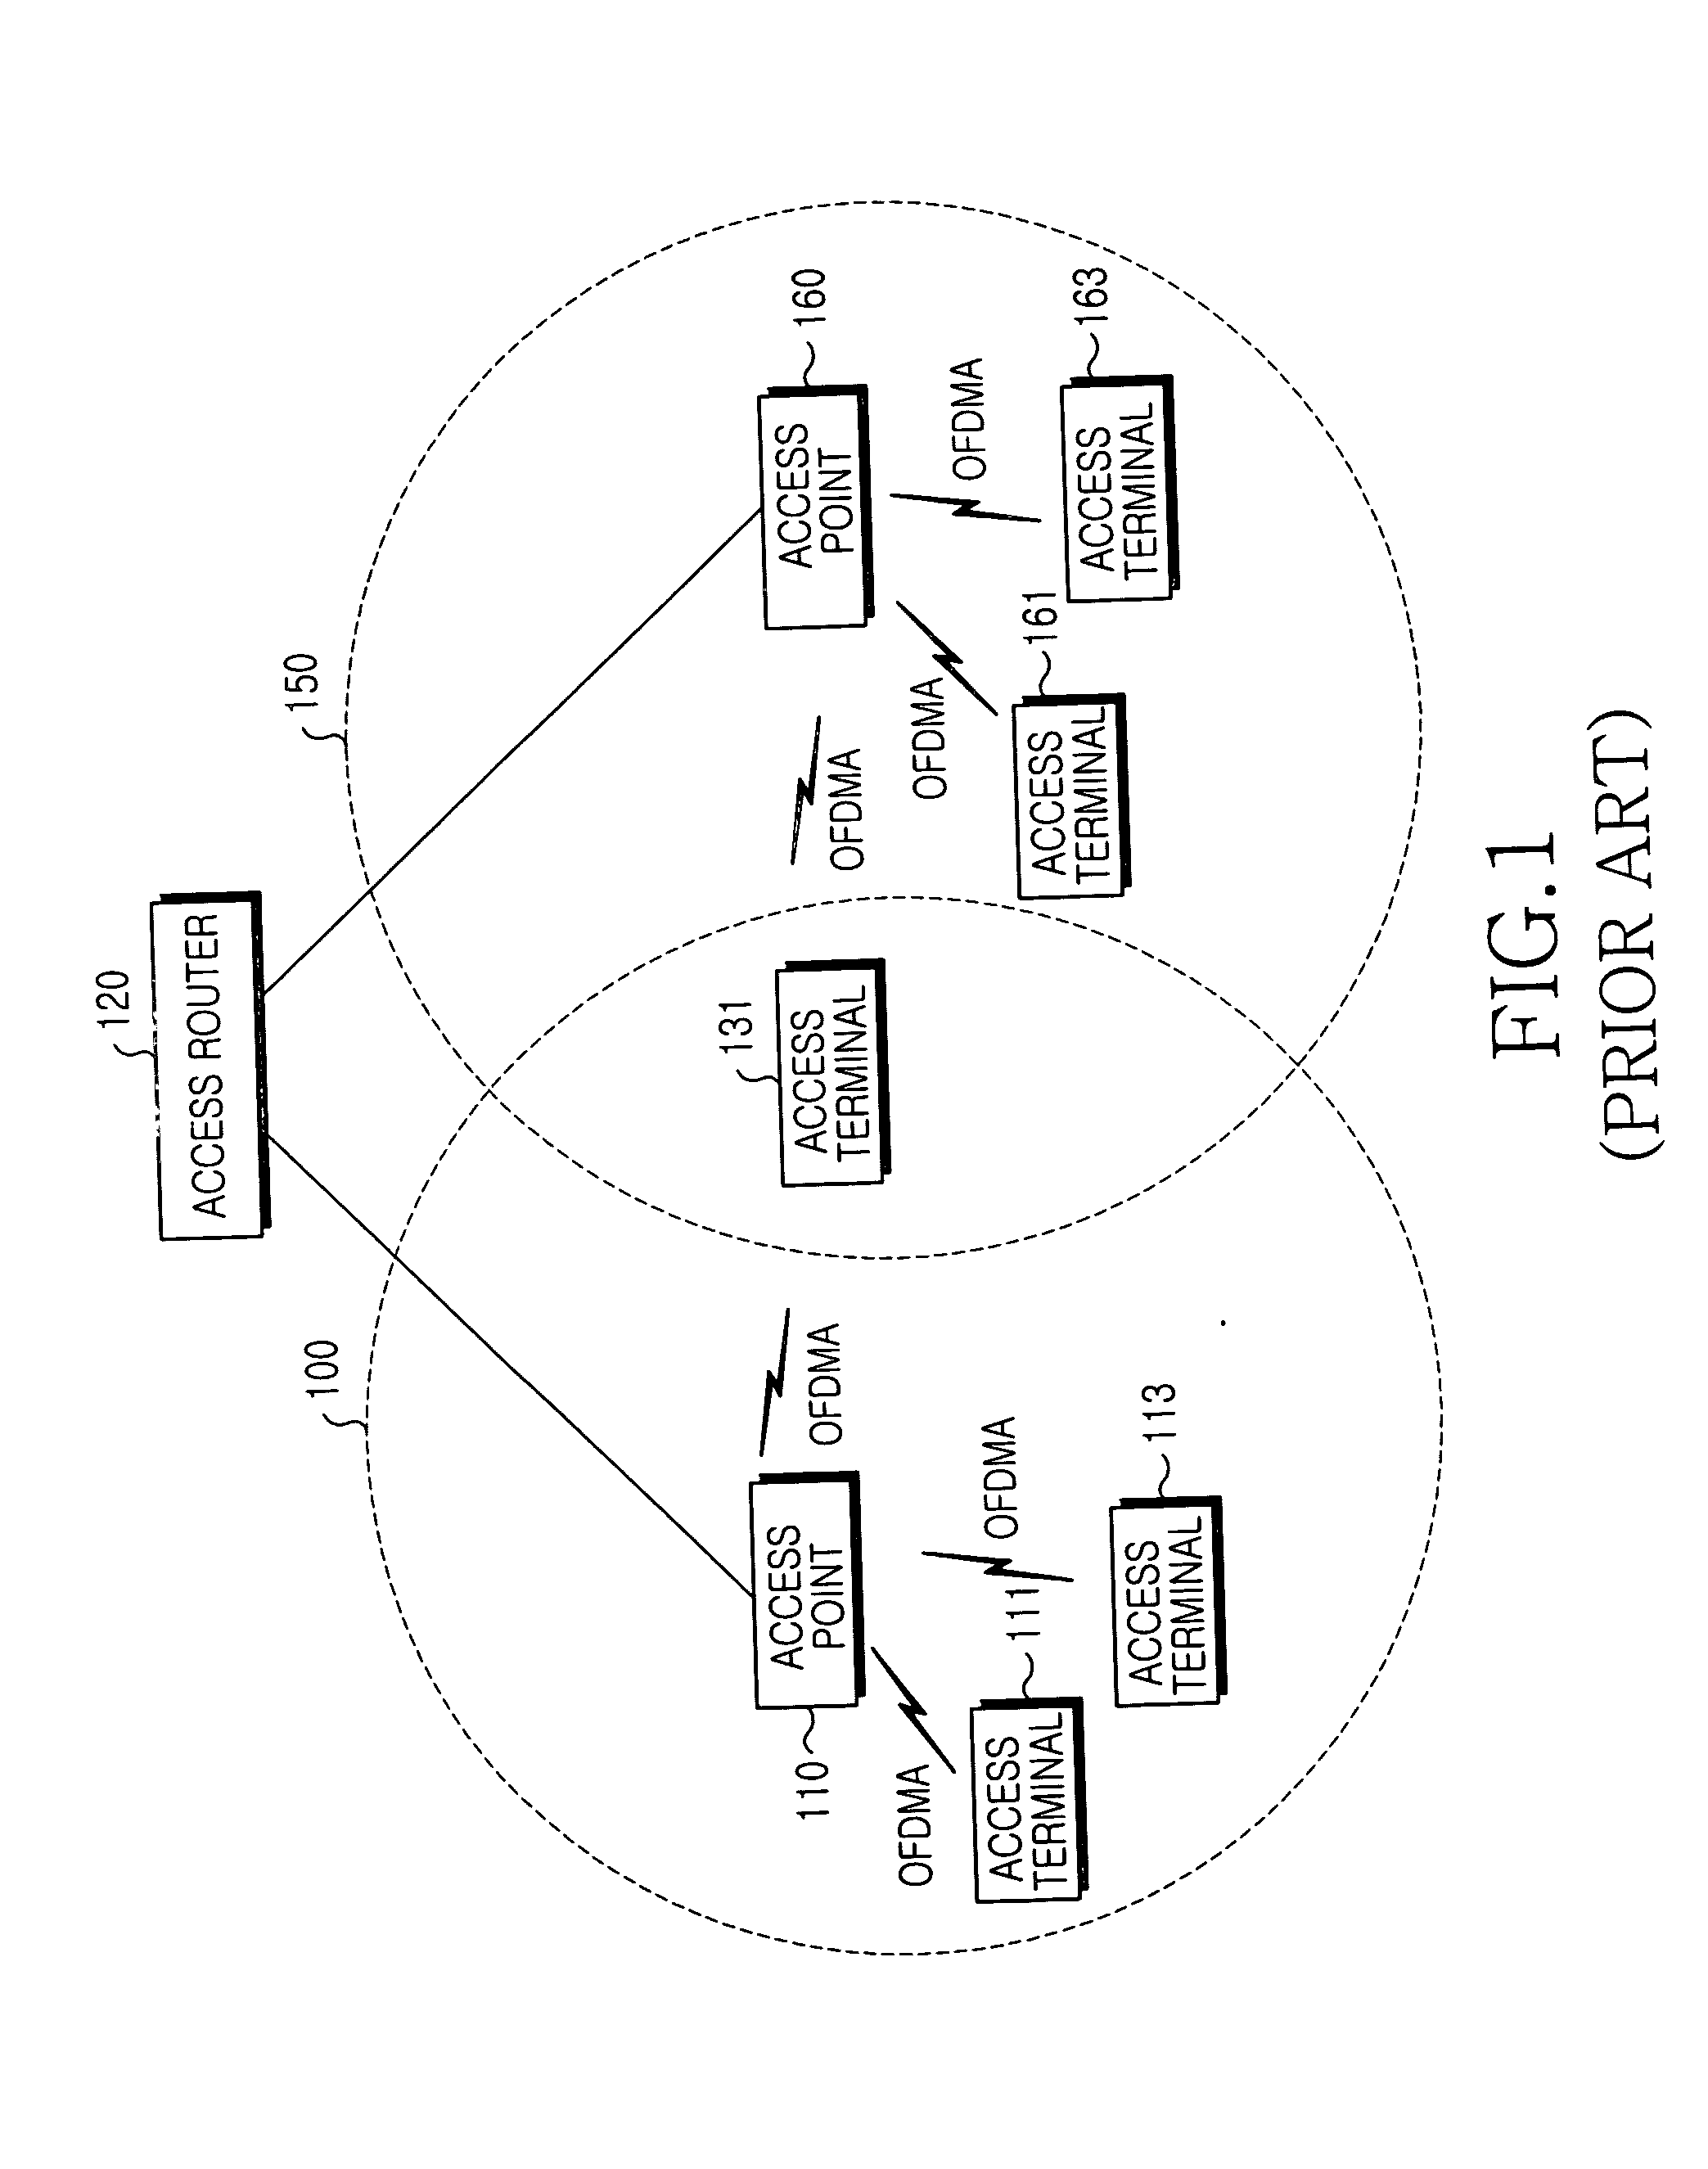 System and method for dynamically allocating resources in a mobile communication system employing orthogonal frequency division multiple access